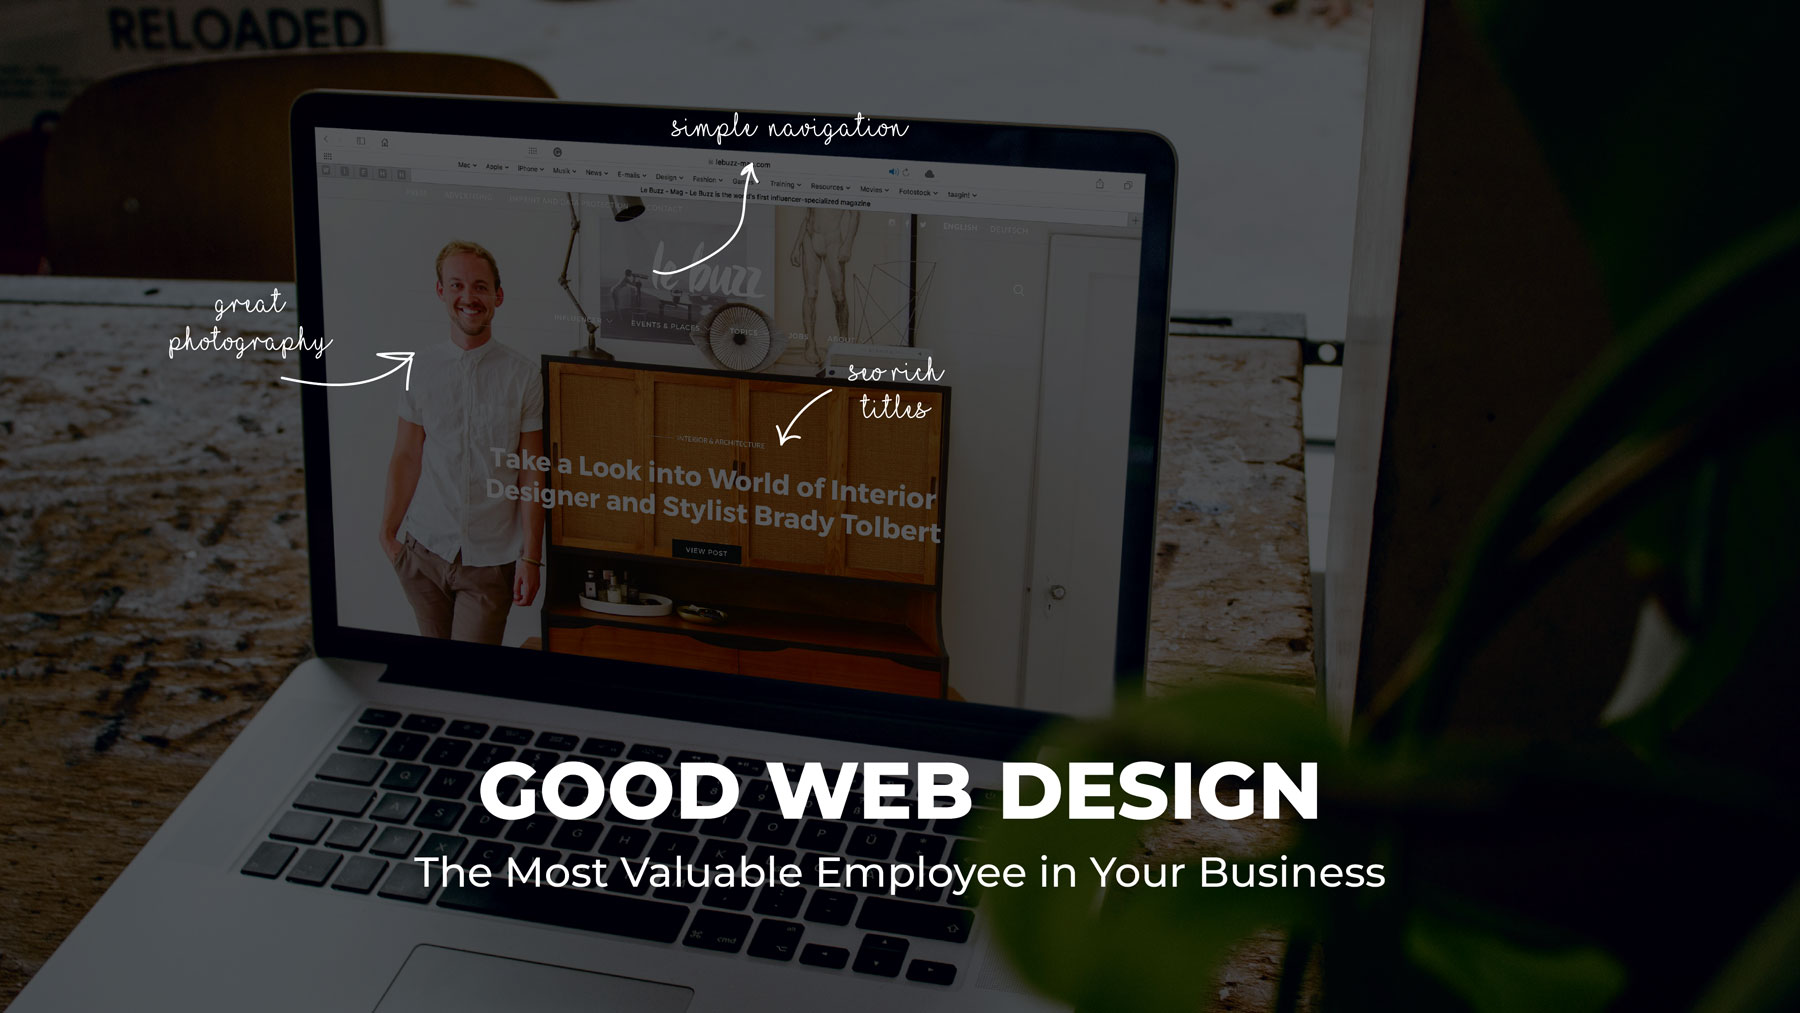 Good Web Design: The Most Valuable Employee in Your Company